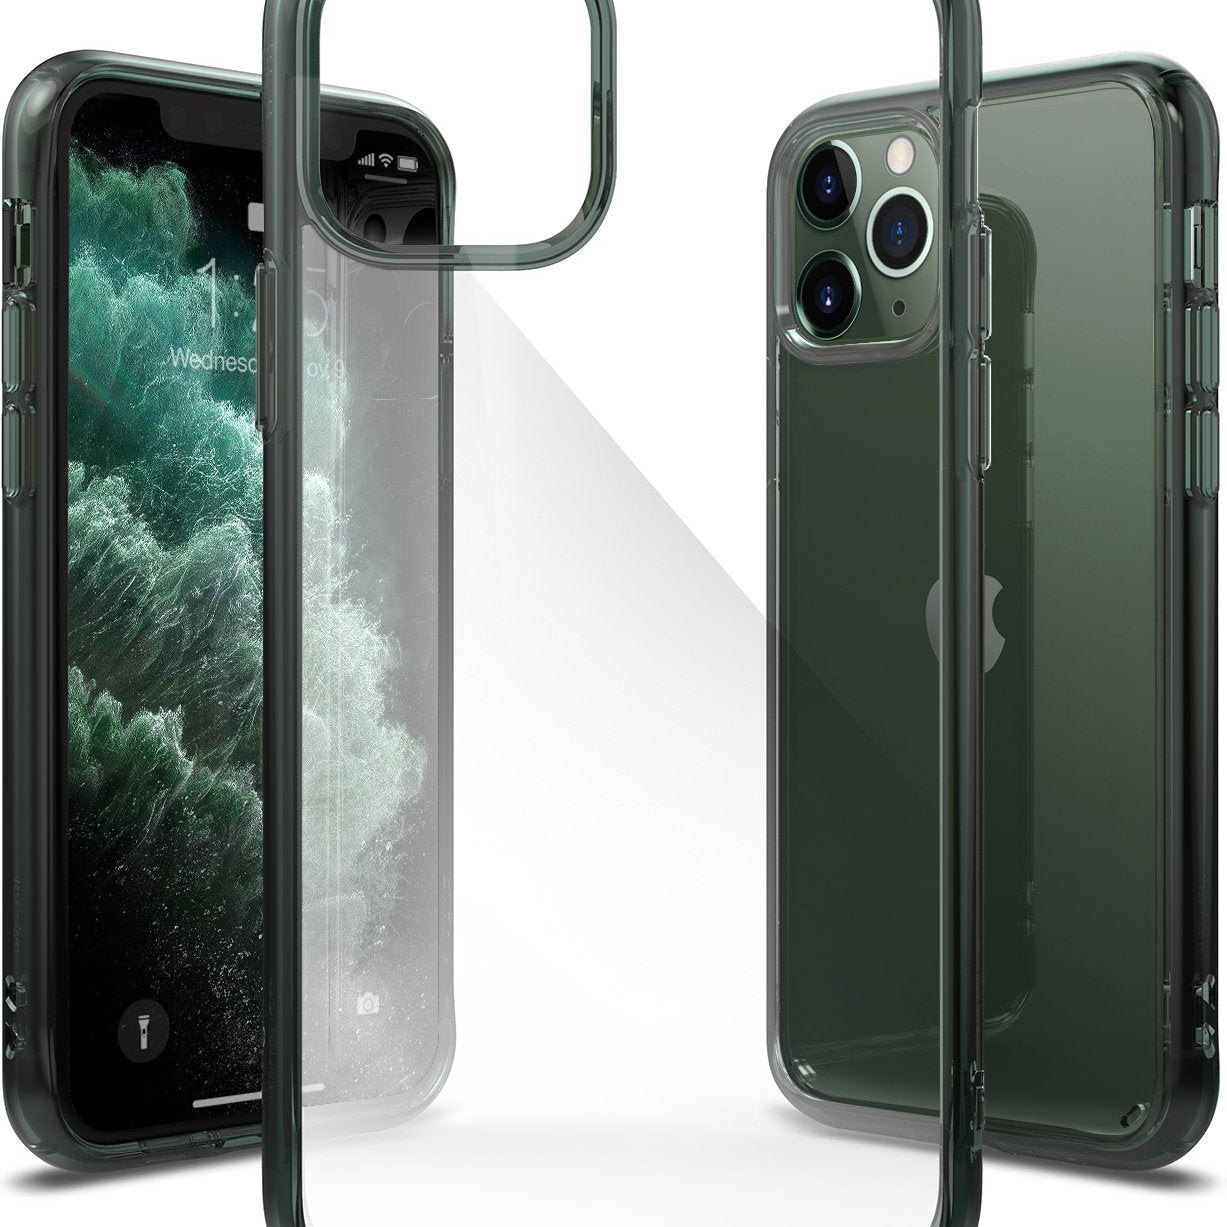 Ringke Fusion Designed for iPhone 11 Pro Max Case iPhone XI Pro Max Case Cover pine green